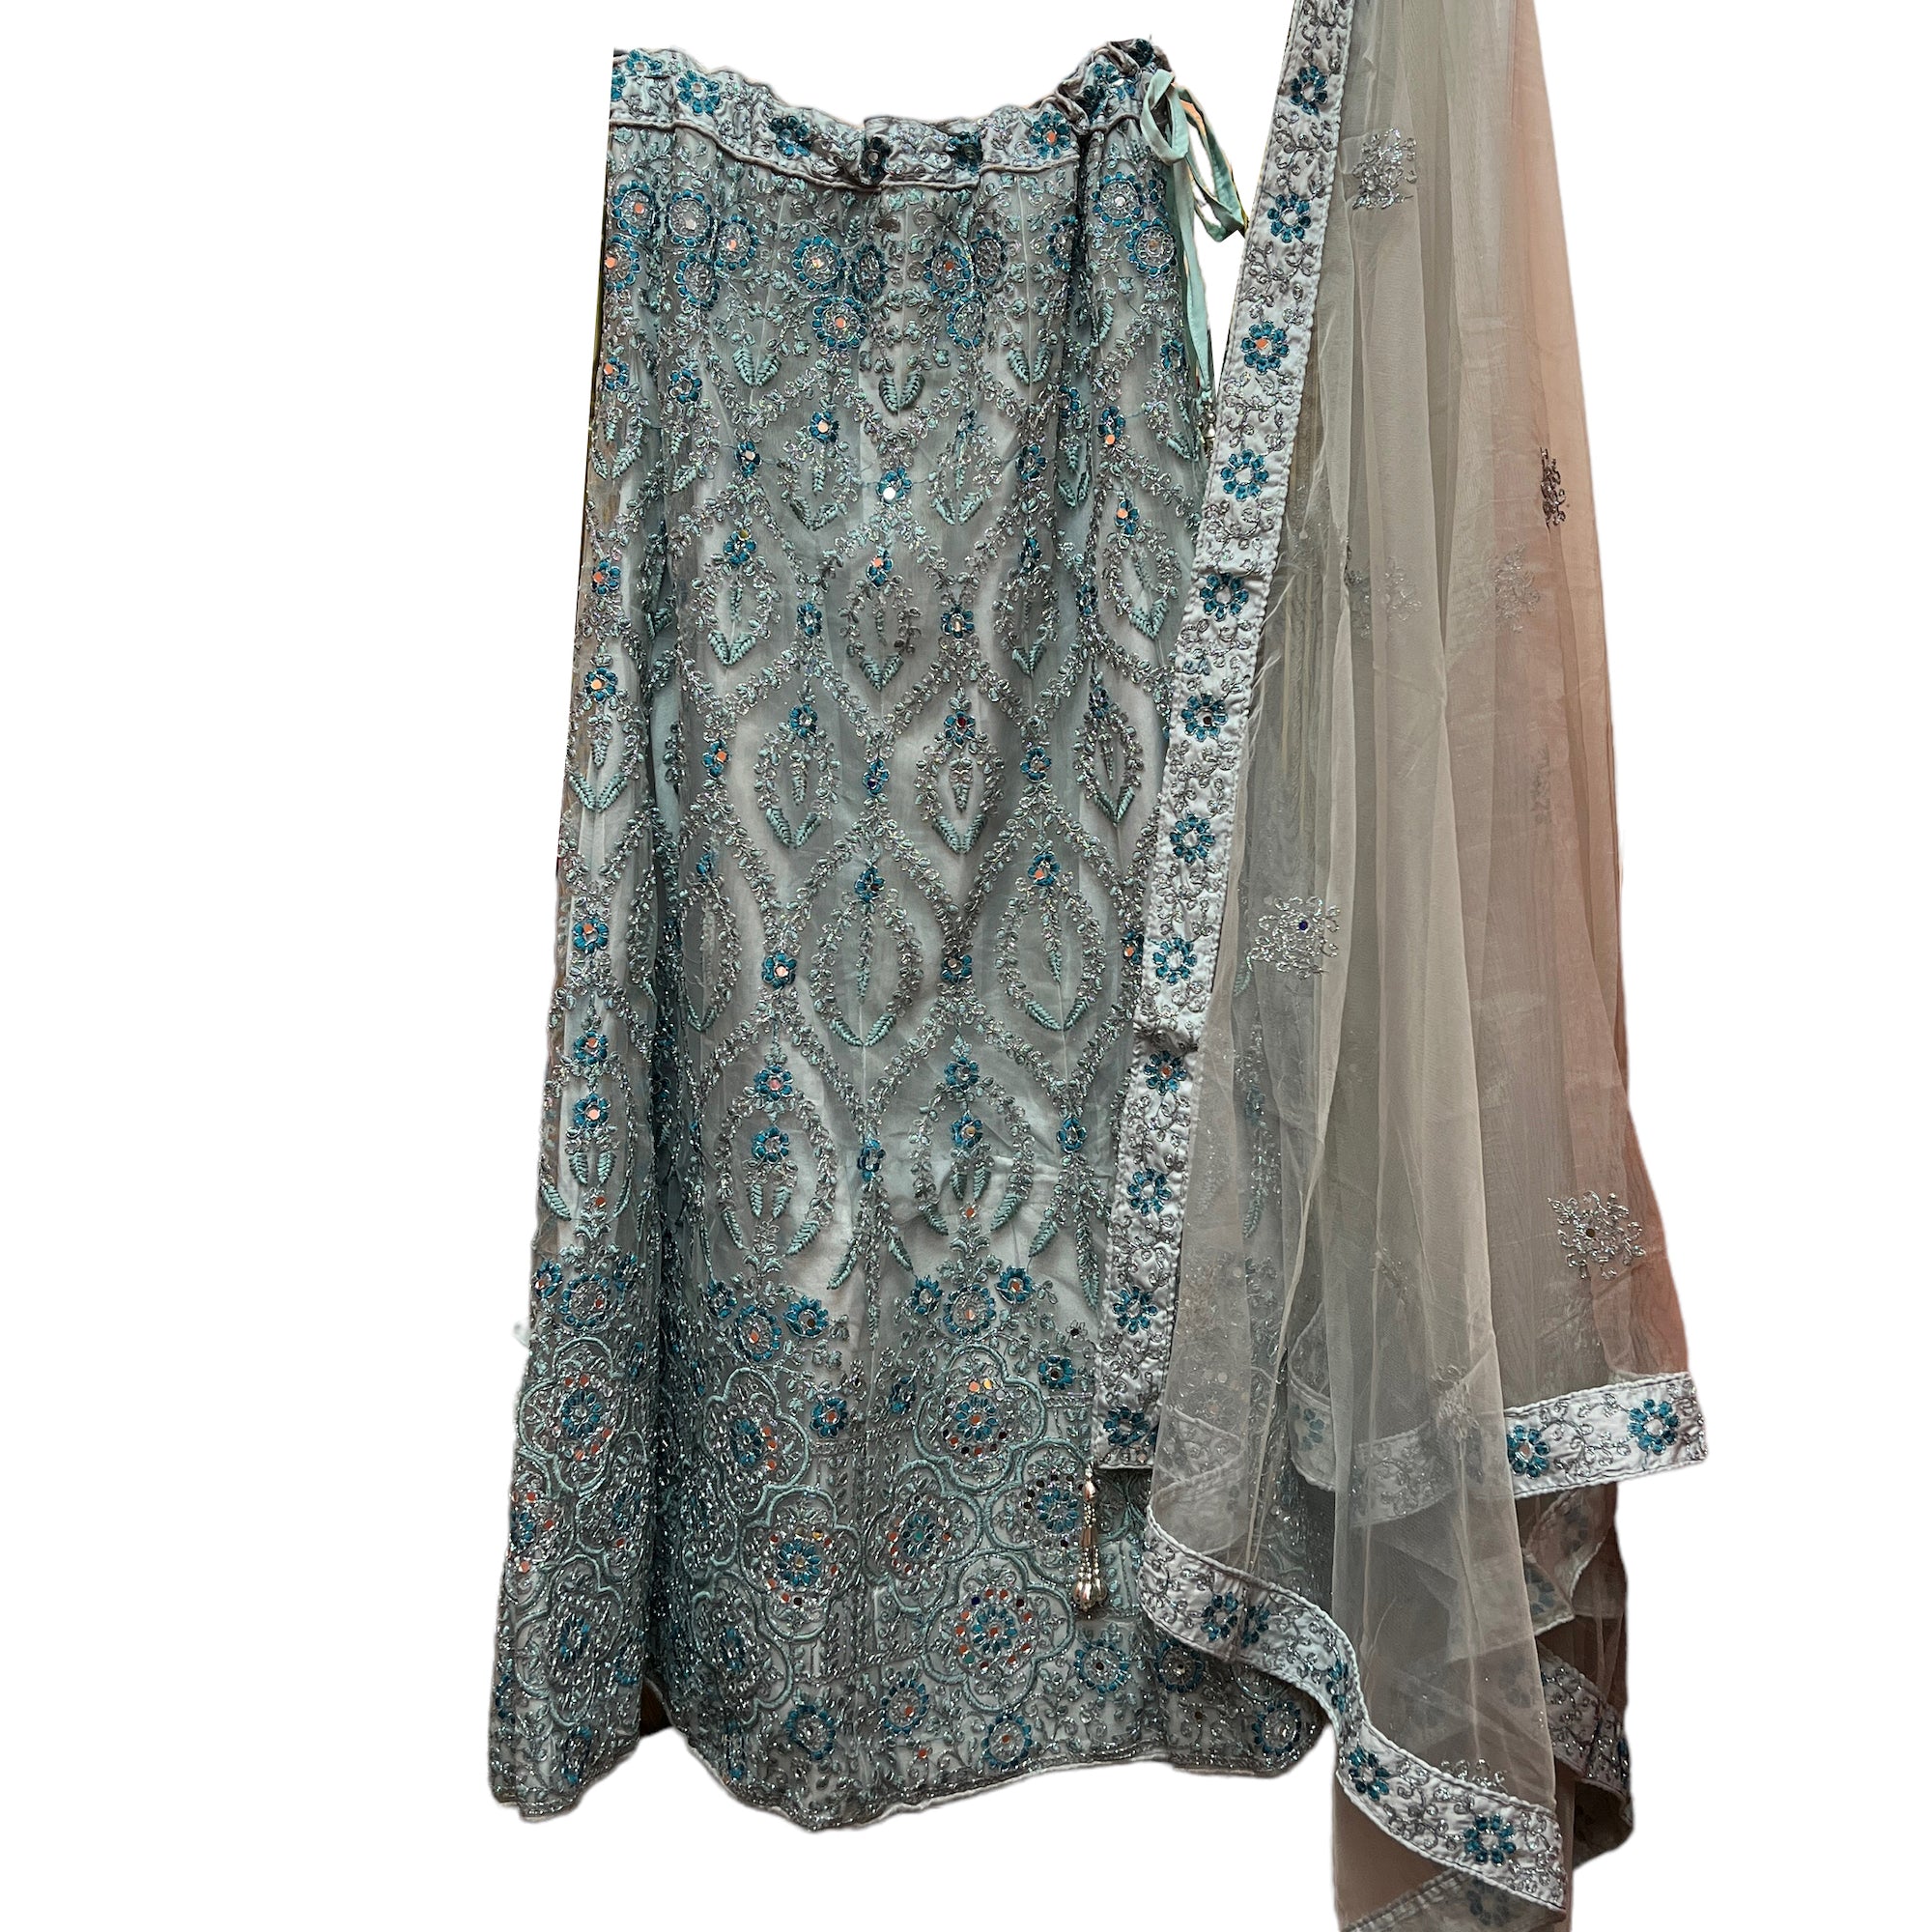 DT Embroiered Lehenga Set-4 Colors - Vintage India NYC